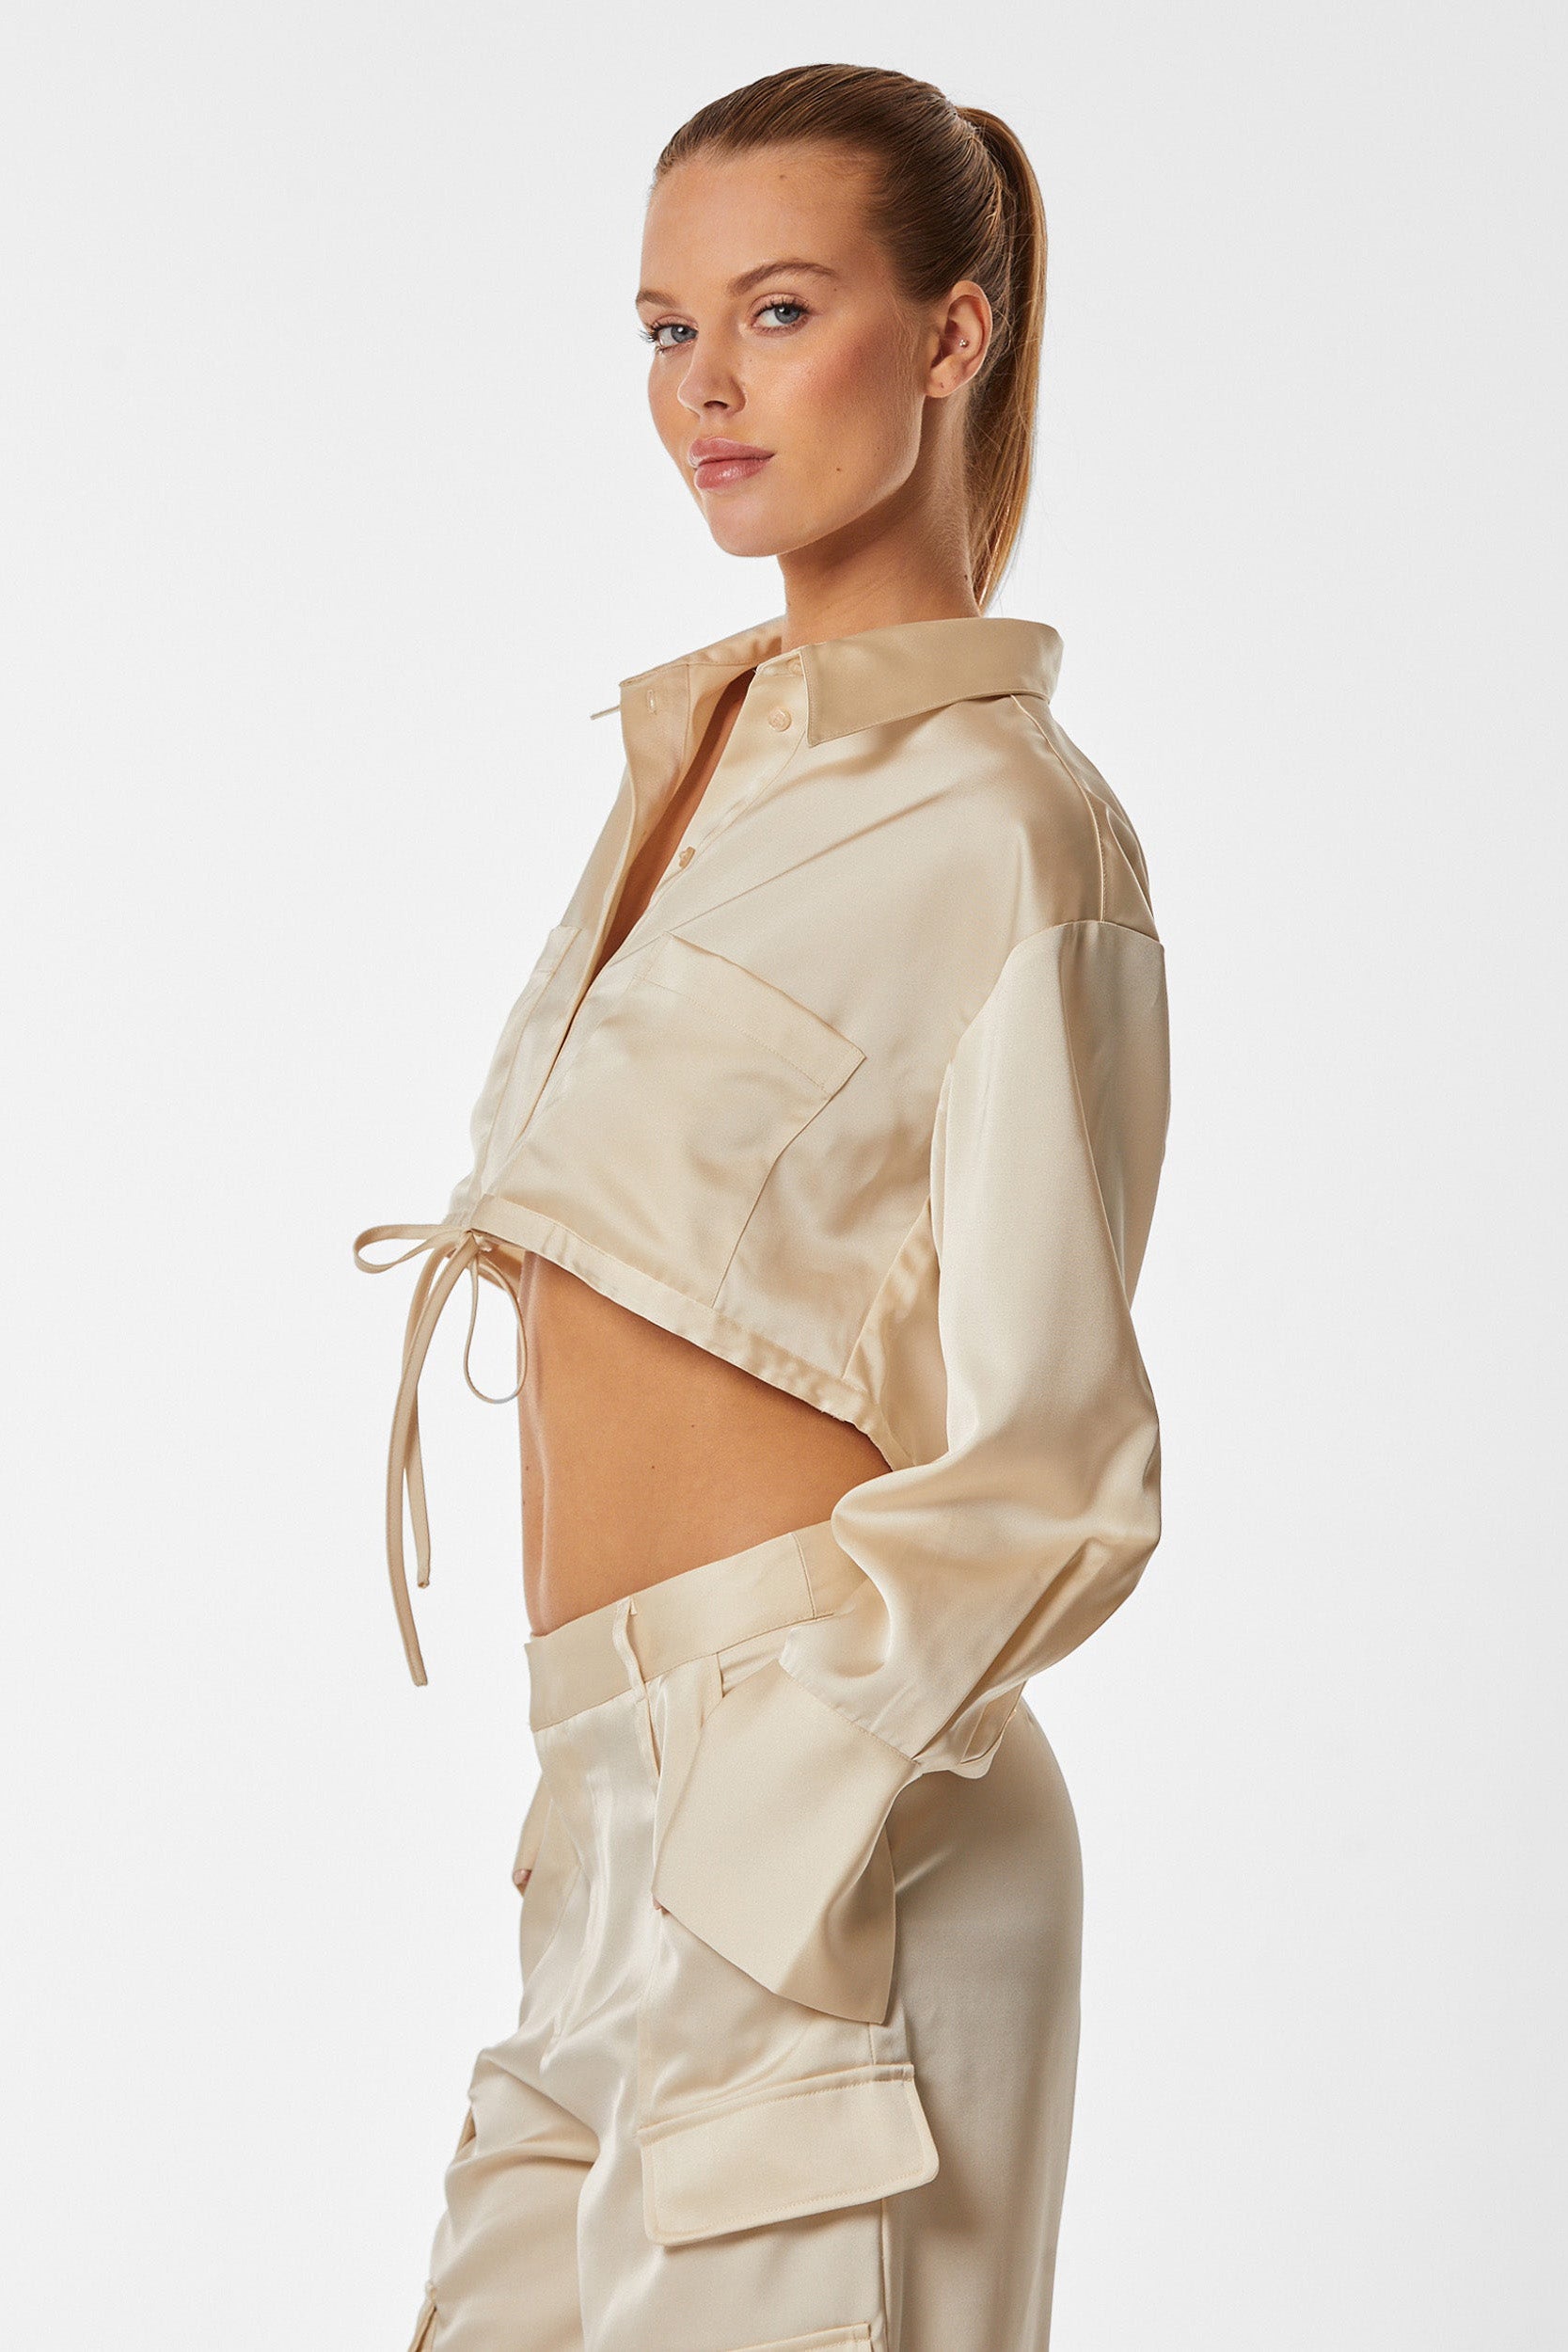 A person with a blonde ponytail wearing the Milan Satin Button Up - Pearl and matching pants featuring cargo detailing. They are standing sideways, looking toward the camera with a neutral expression against a plain white background.